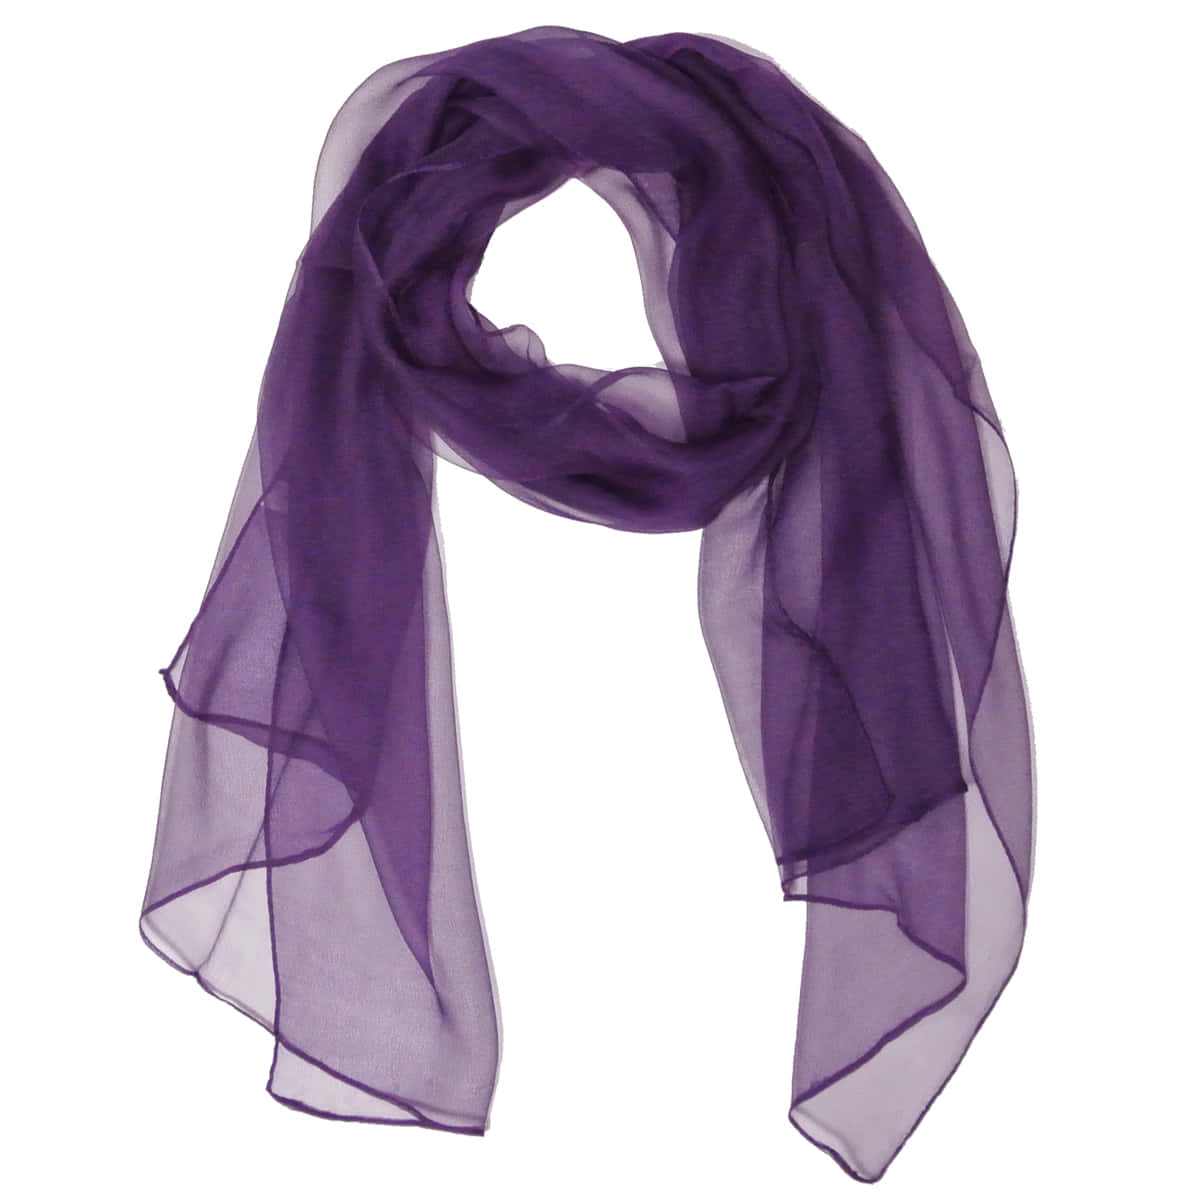 Stay Stylish and Warm With This Purple Scarf Wallpaper